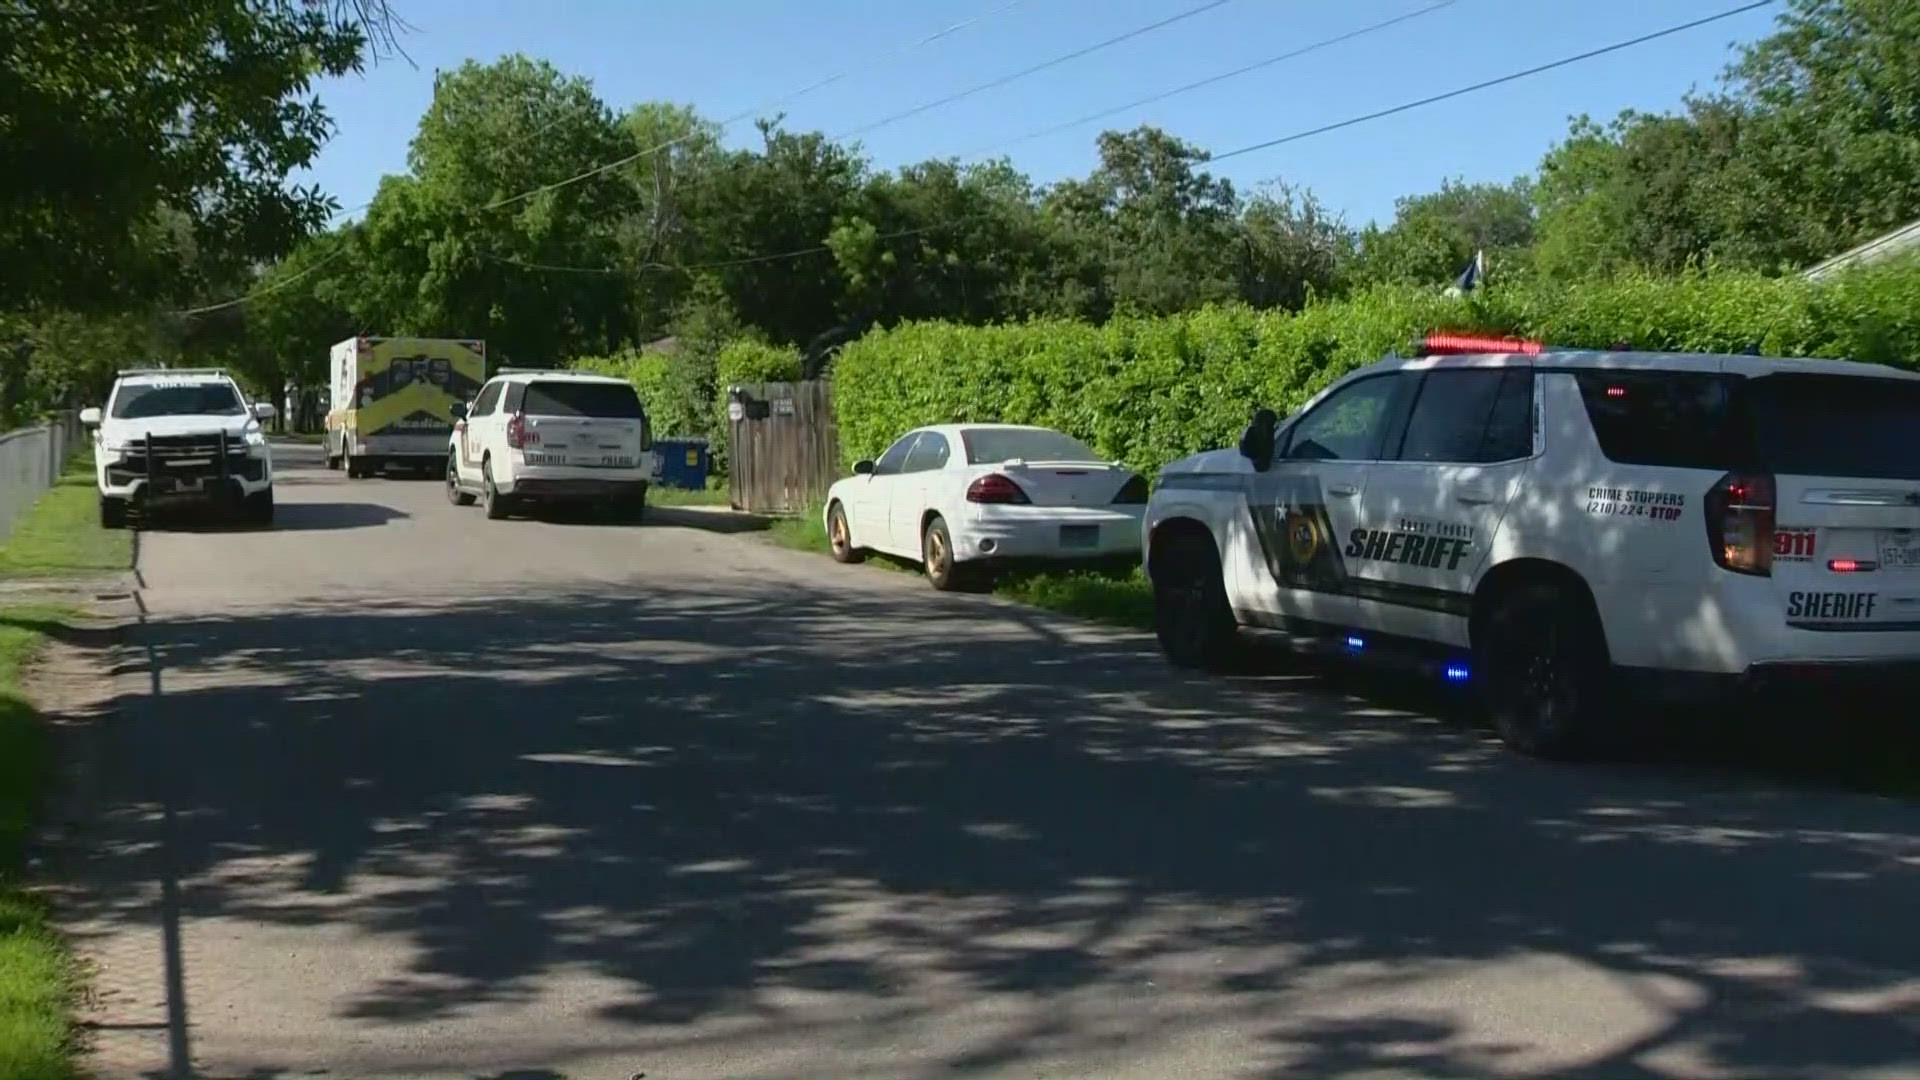 Deputies investigating after two men found dead in south Bexar County home